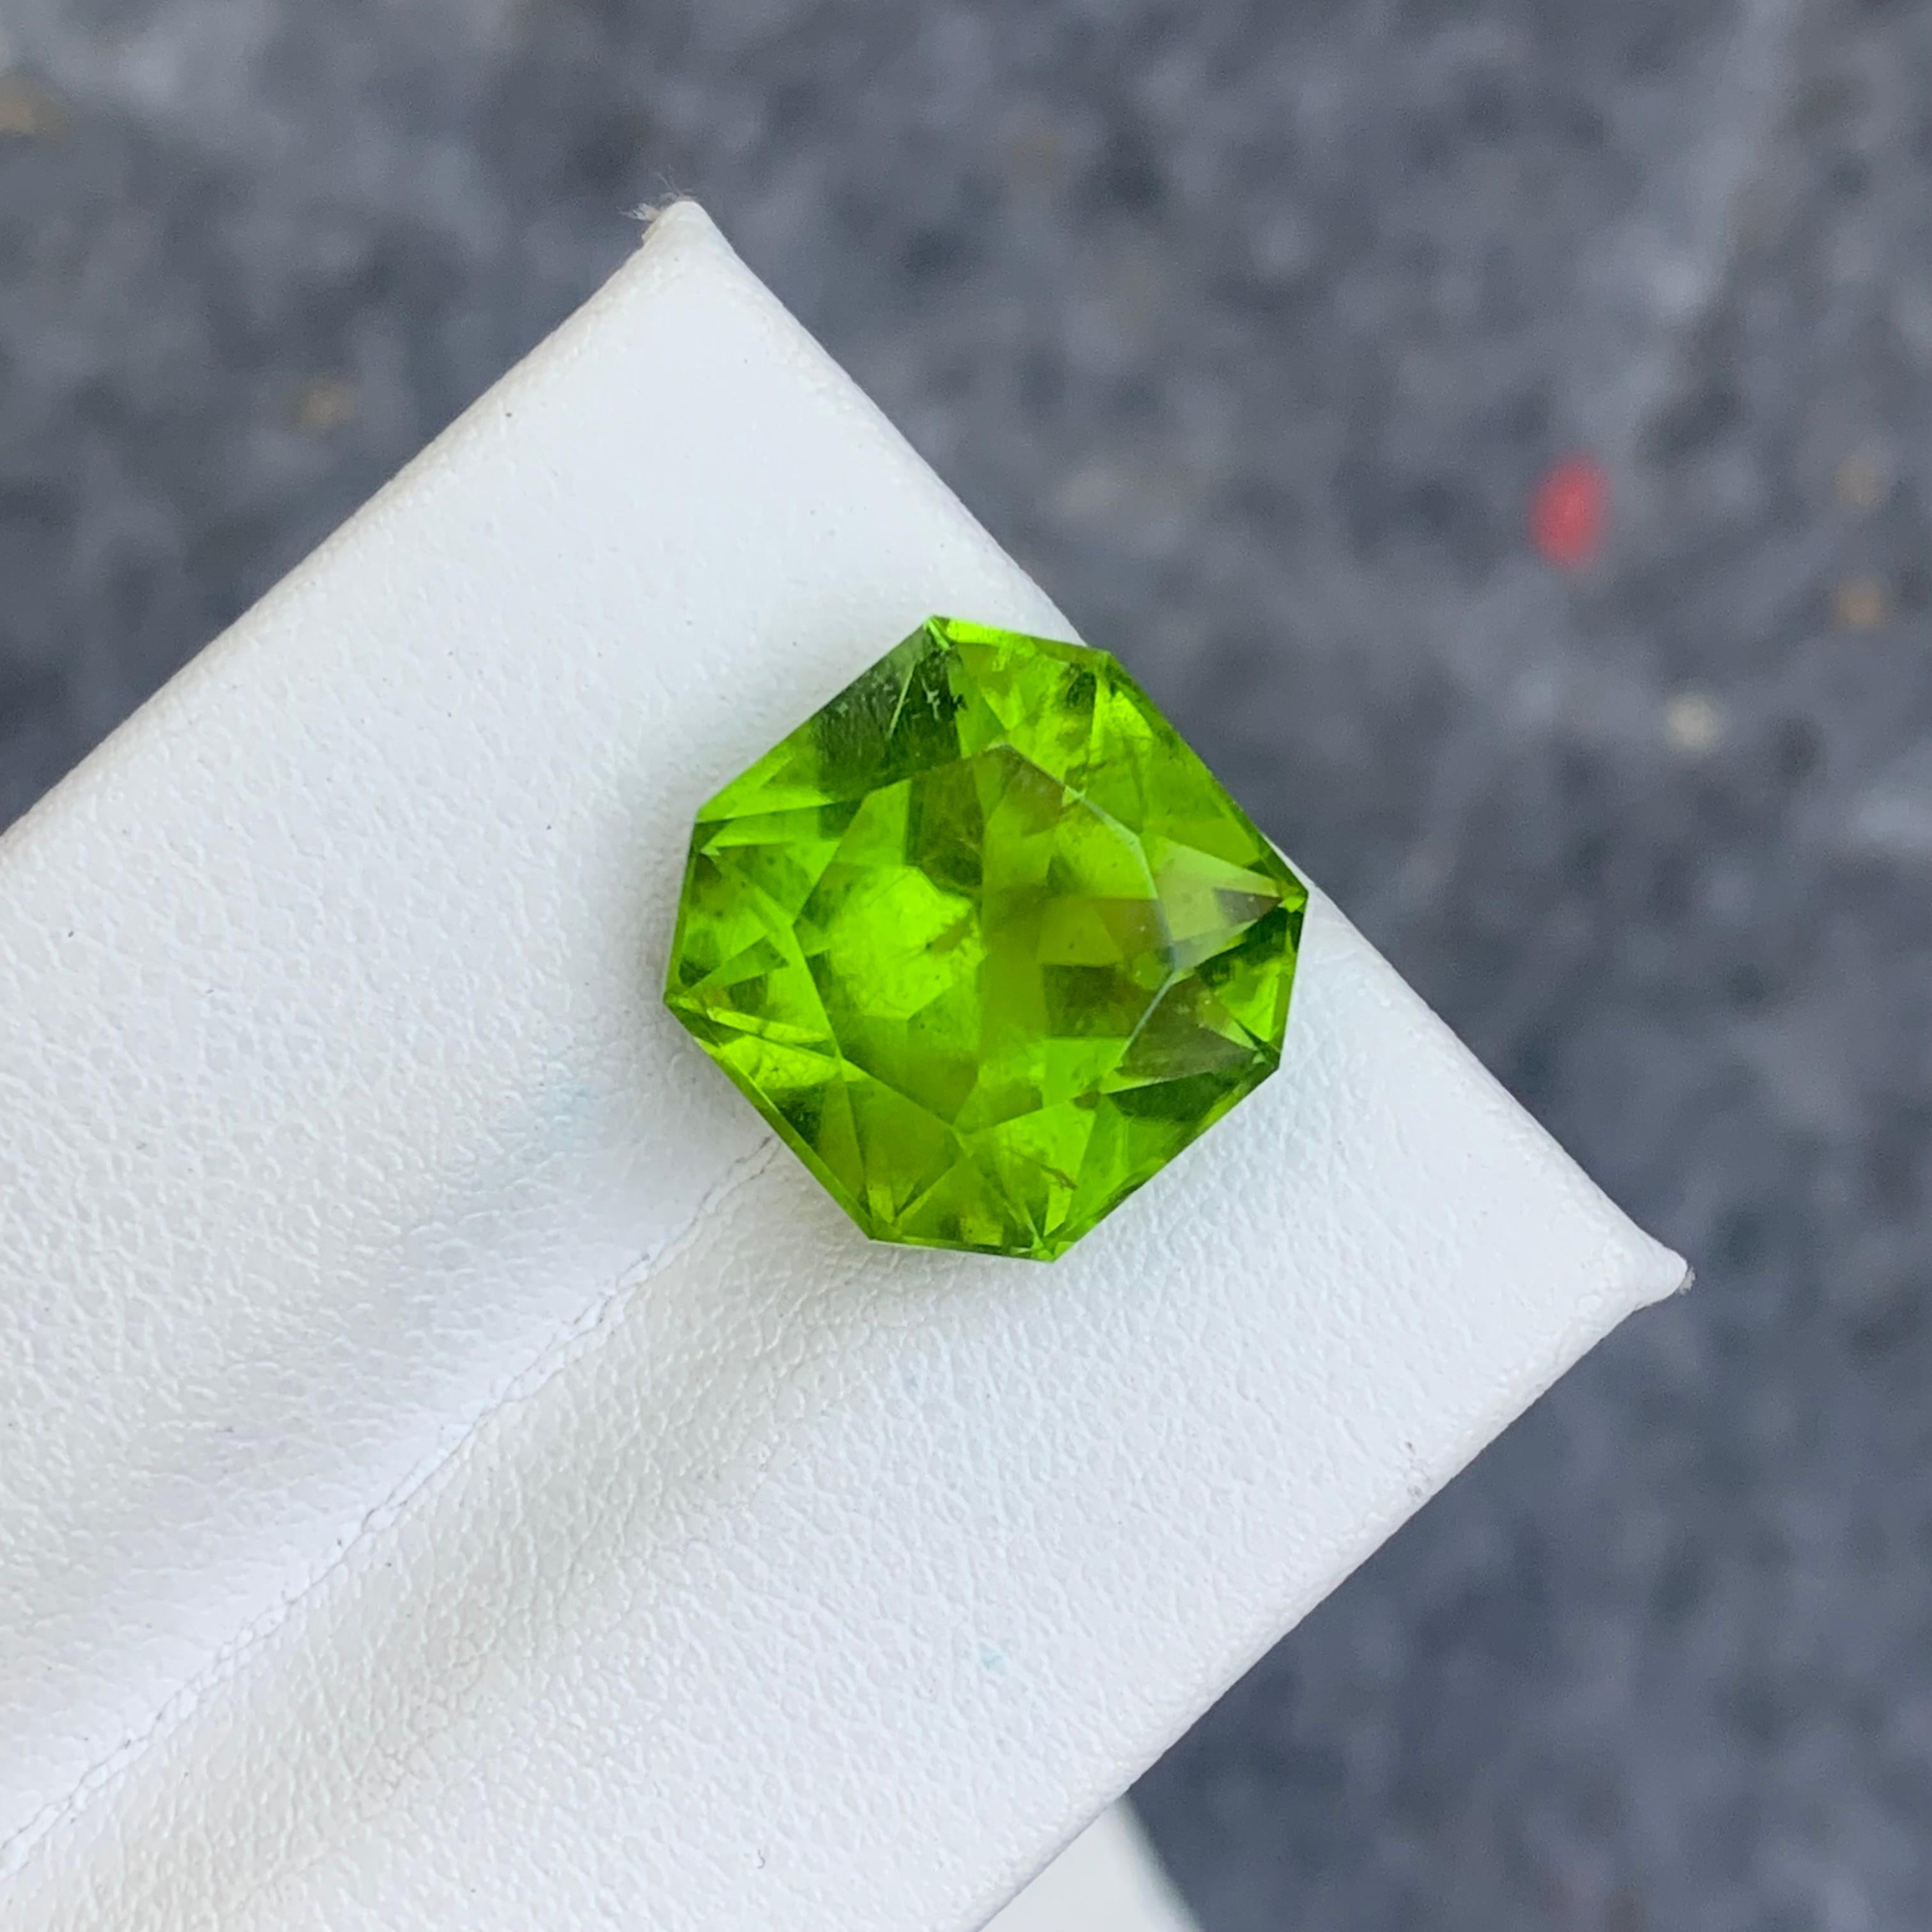 Octagon Cut Natural 10.10 Carat Apple Green Loose Peridot Included Clarity from Supat Valley For Sale